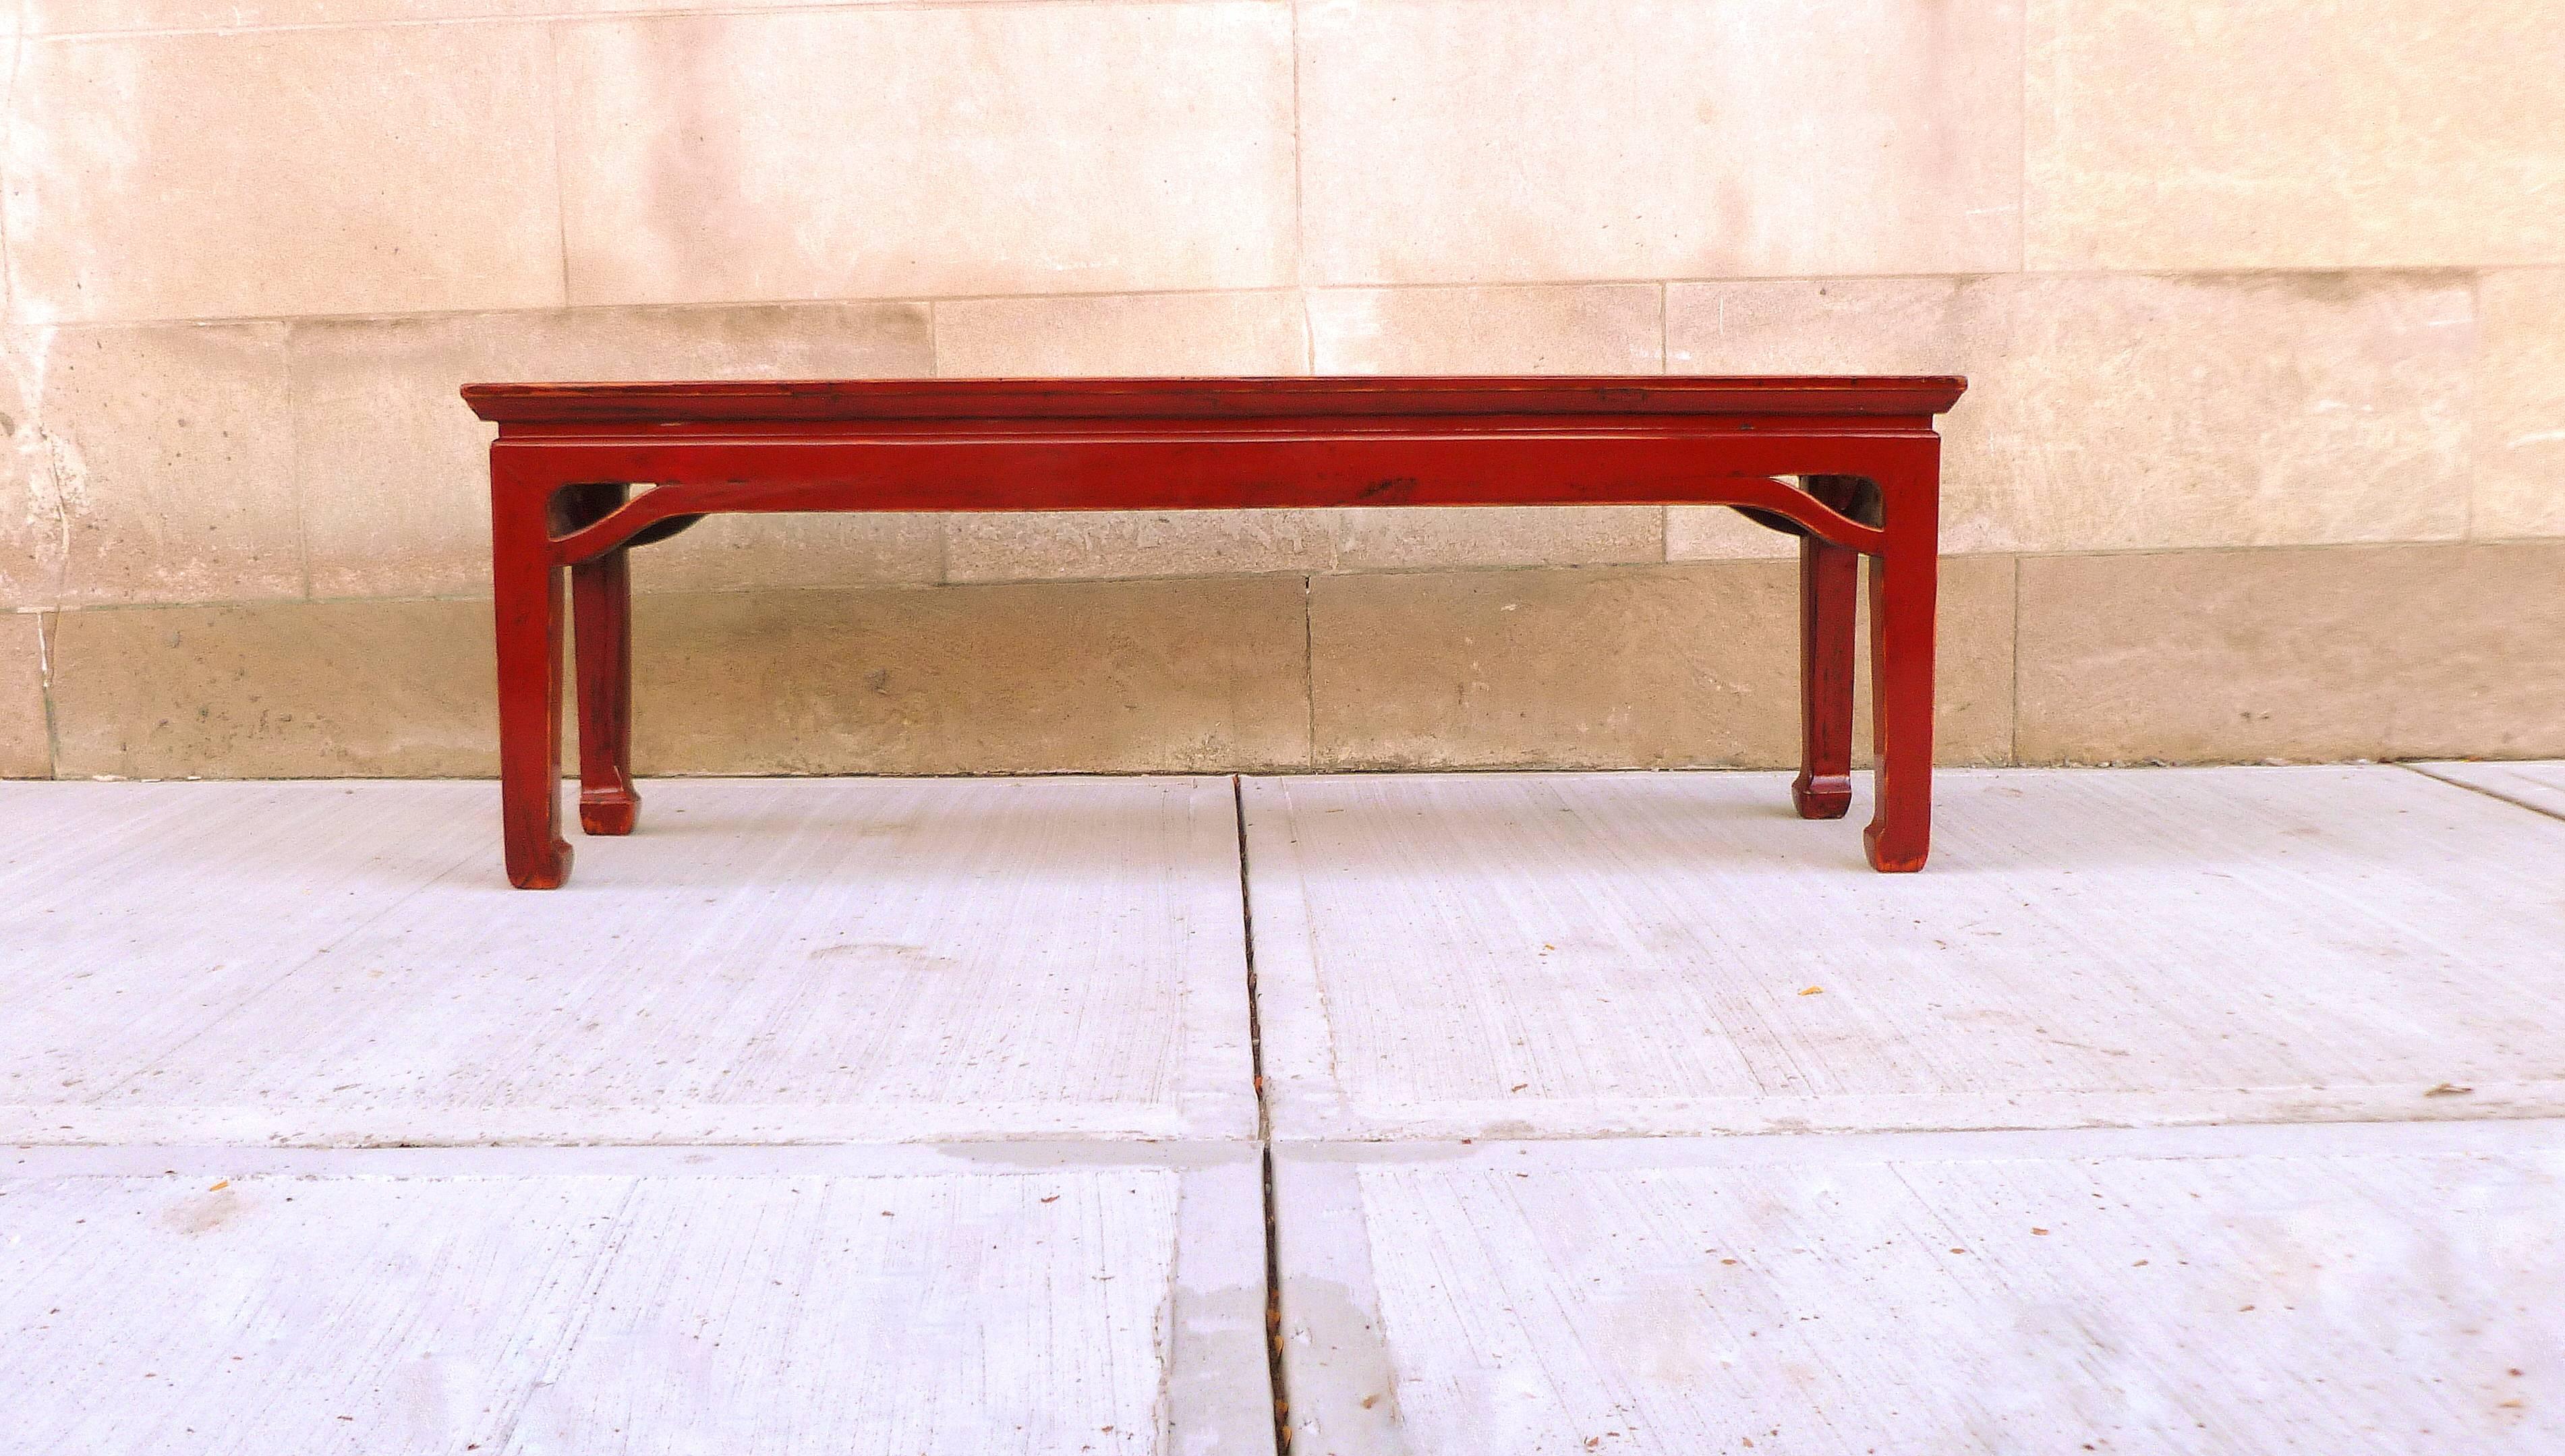 Red lacquer bench. Very elegant red lacquer bench, beautiful color and lines.